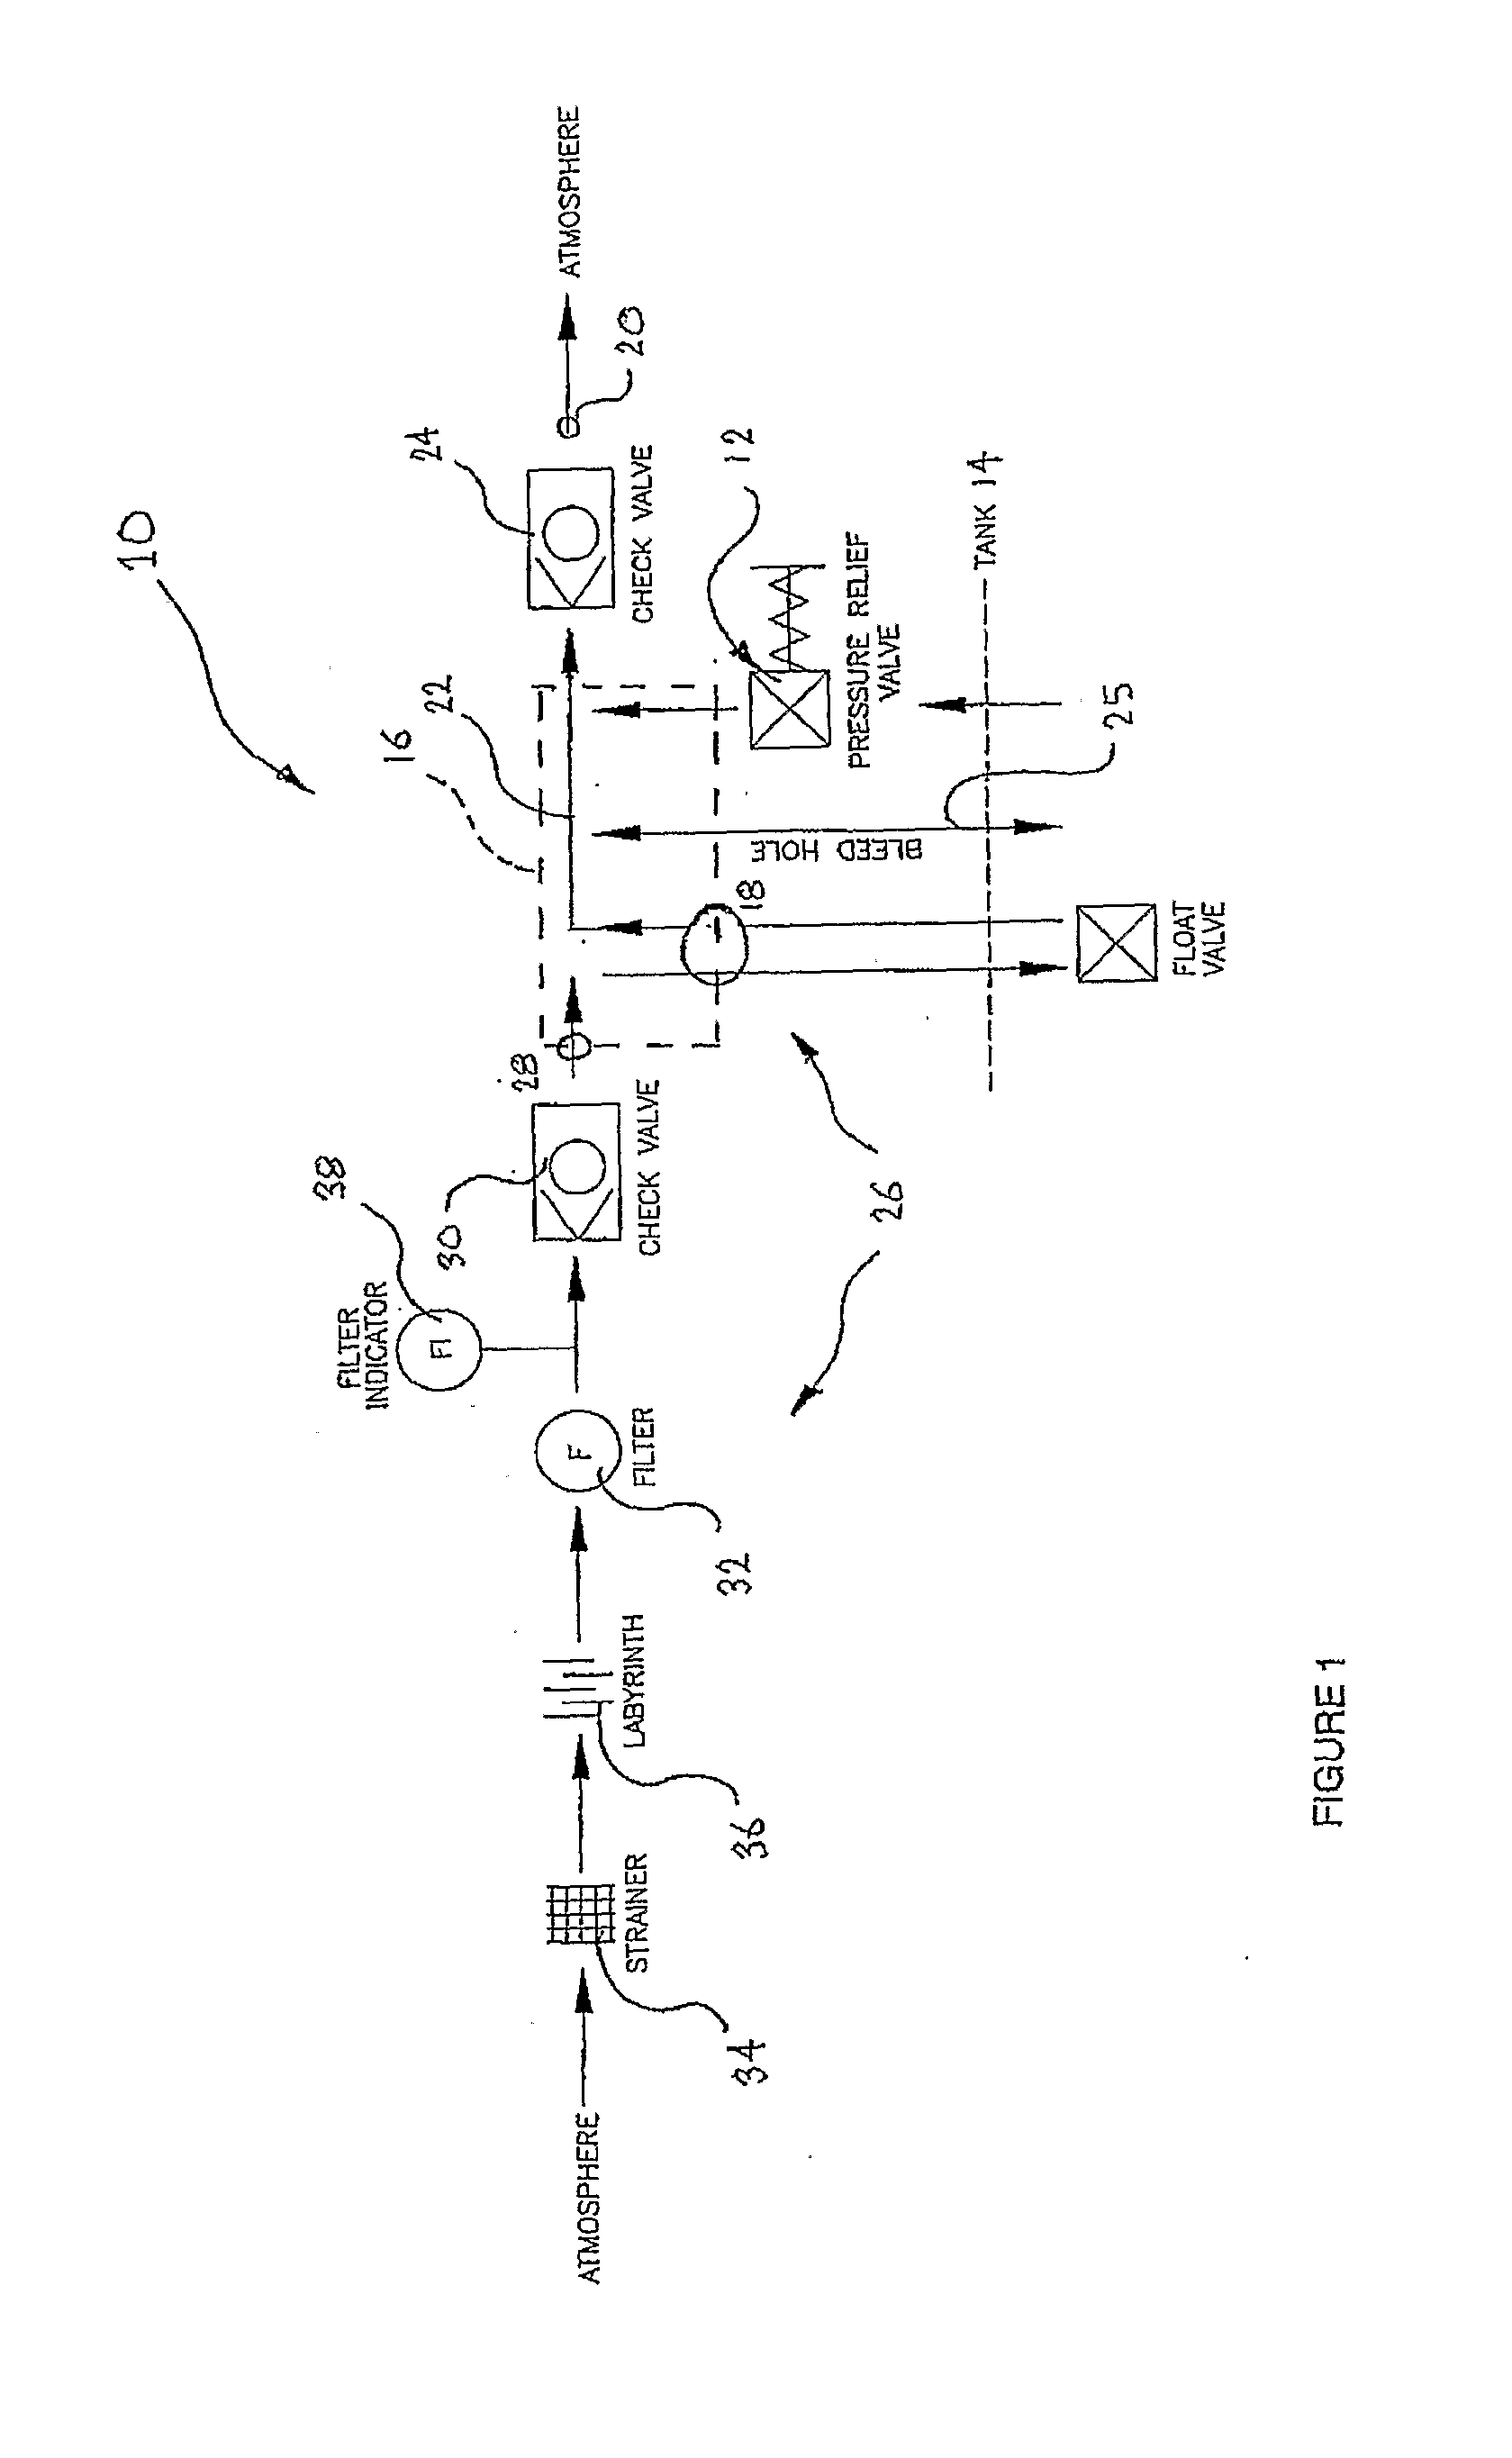 Pressure relief valve and vent assembly